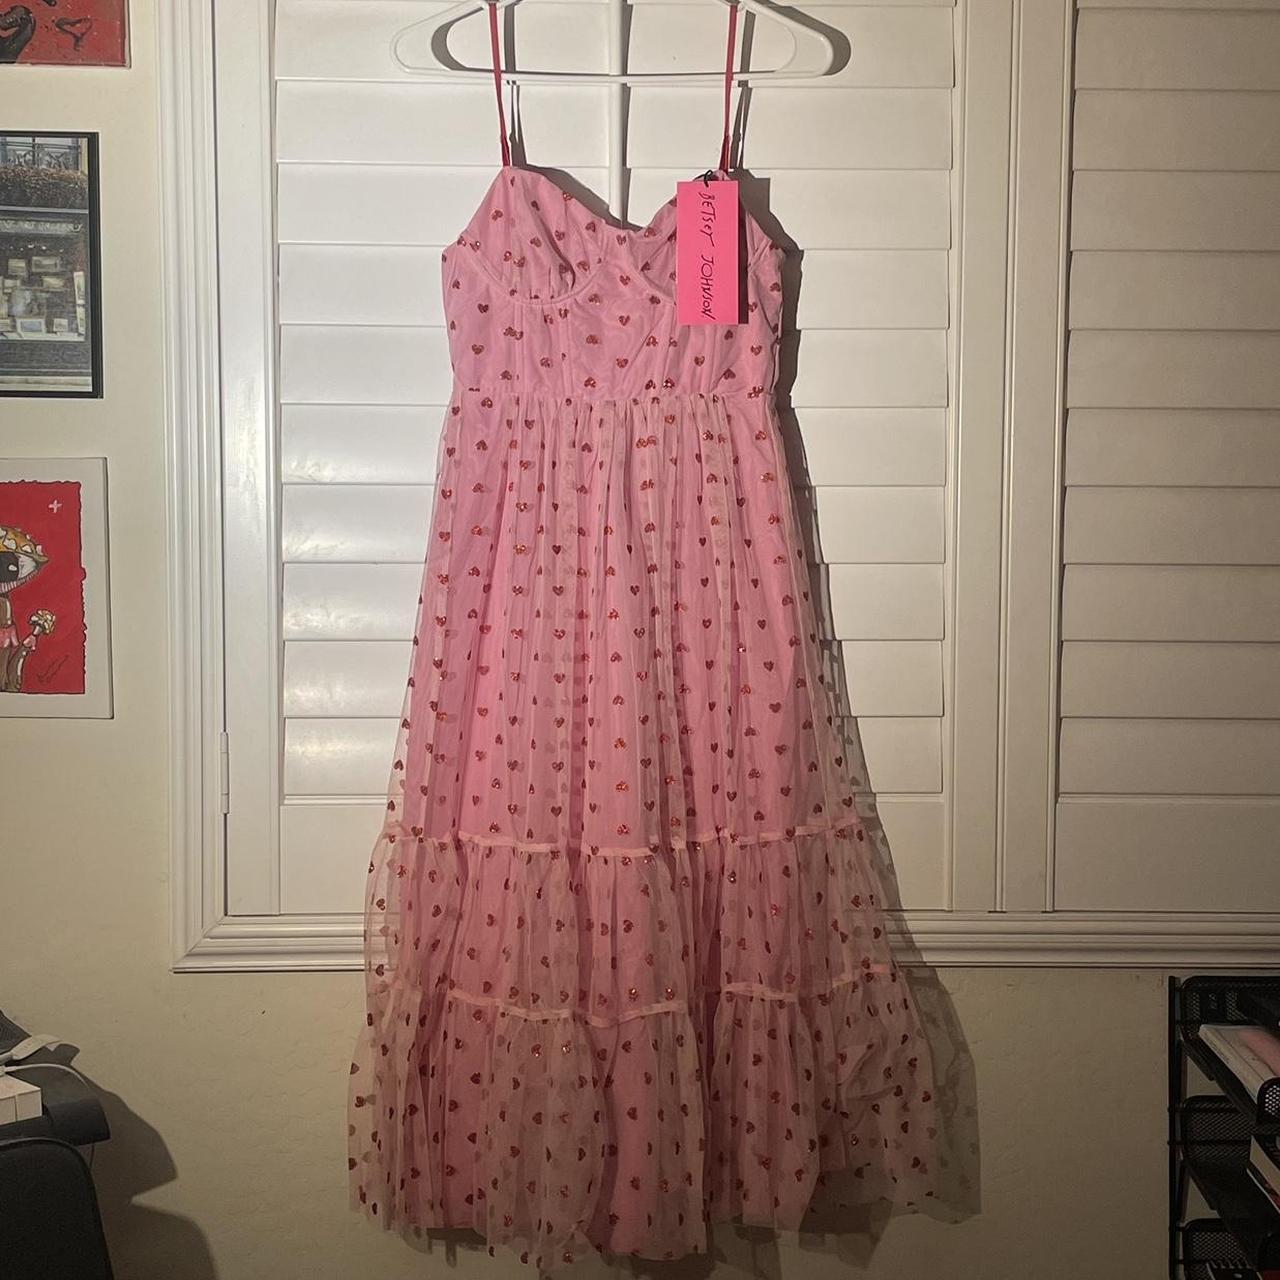 Betsey Johnson Women's Red and Pink Dress | Depop